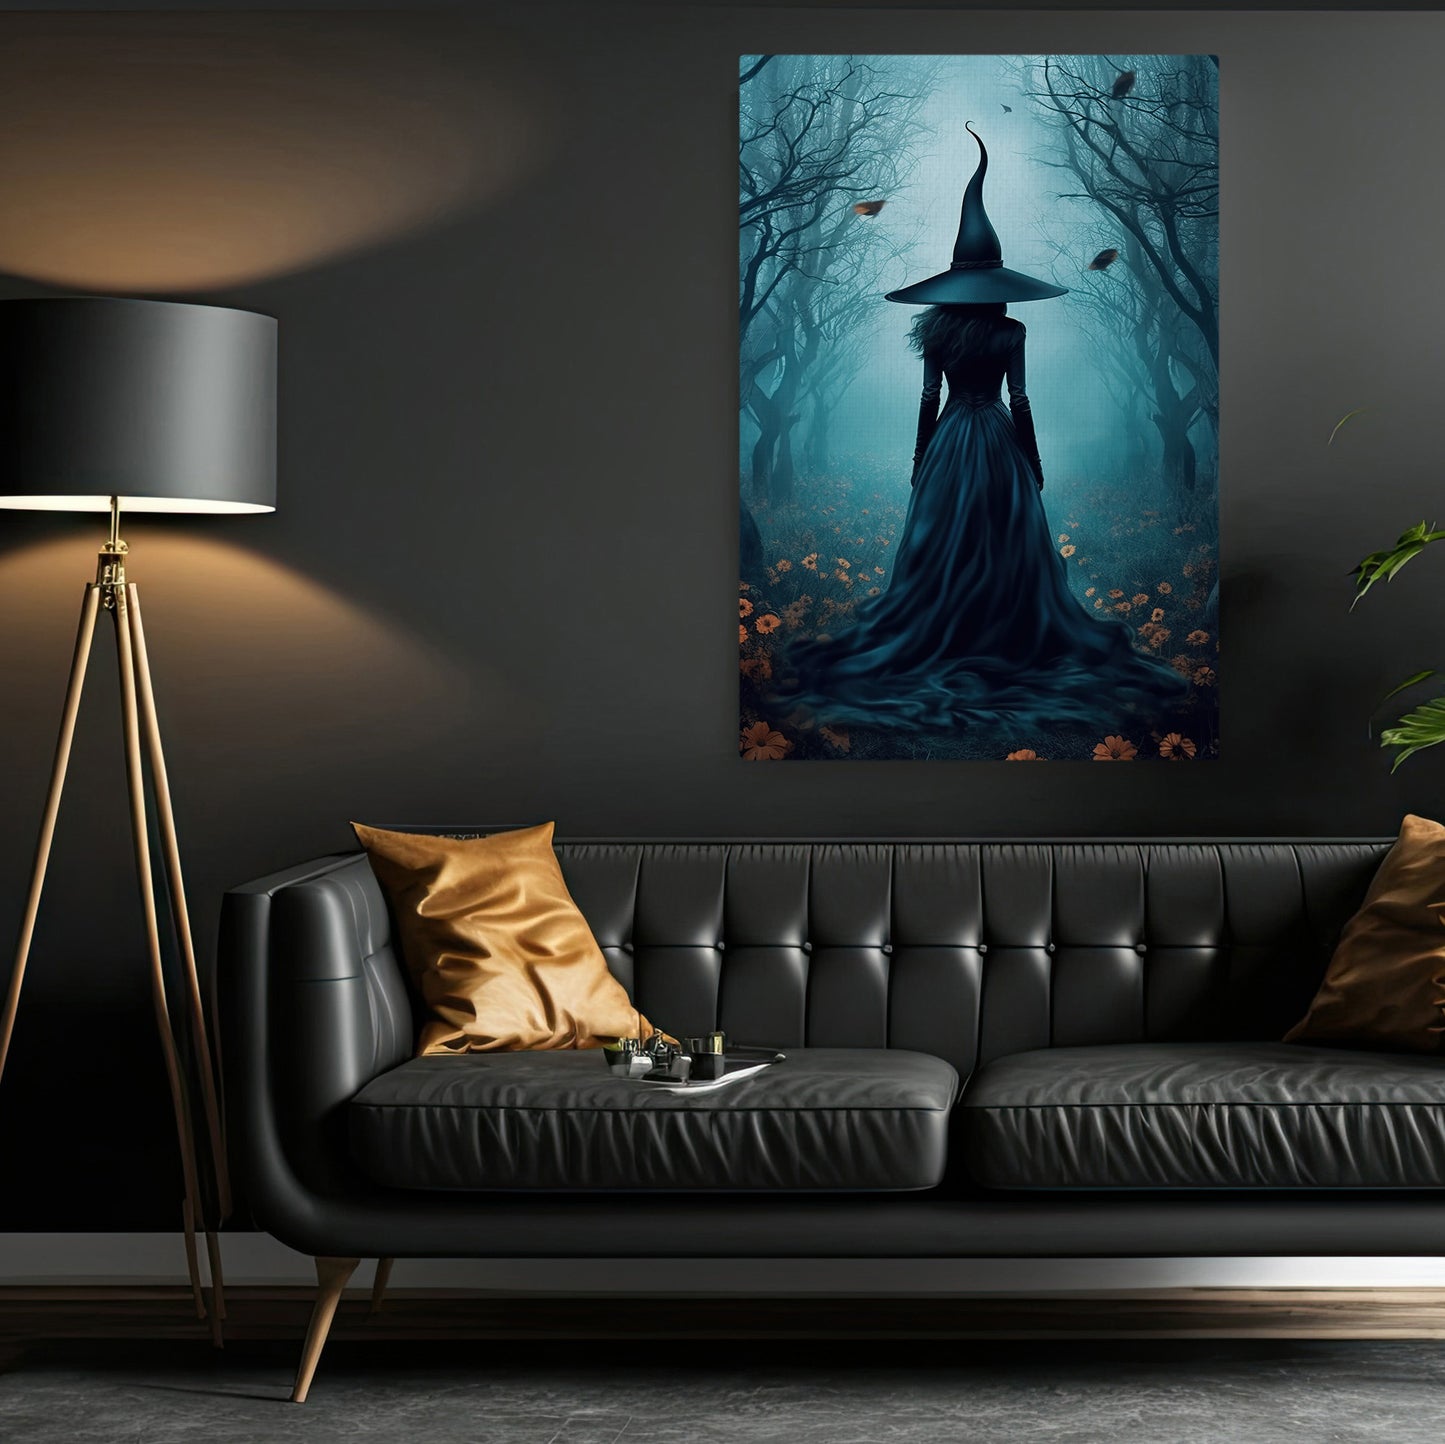 The Witch Twilight Dark Forest Vintage Gothic Spooky Canvas Painting, Witches Wall Art Decor - Dark Academia Witchy Poster Gift